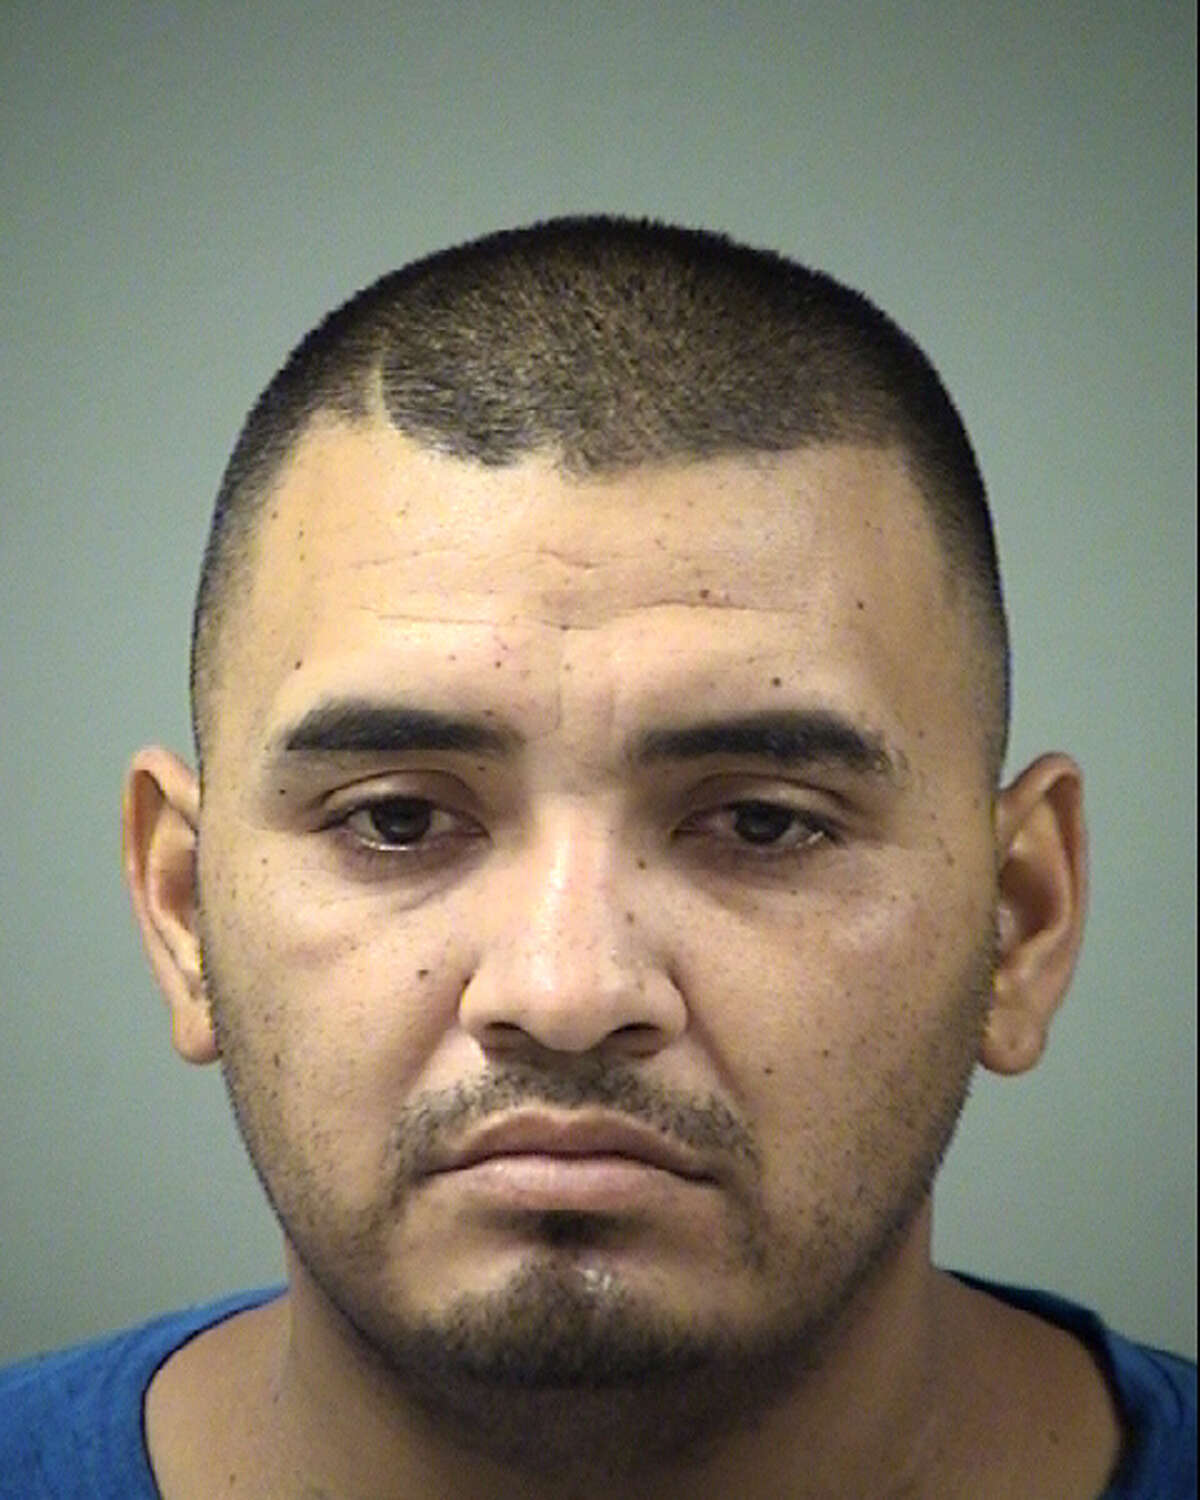 Paul Sambrano, 29, is charged with capital murder.